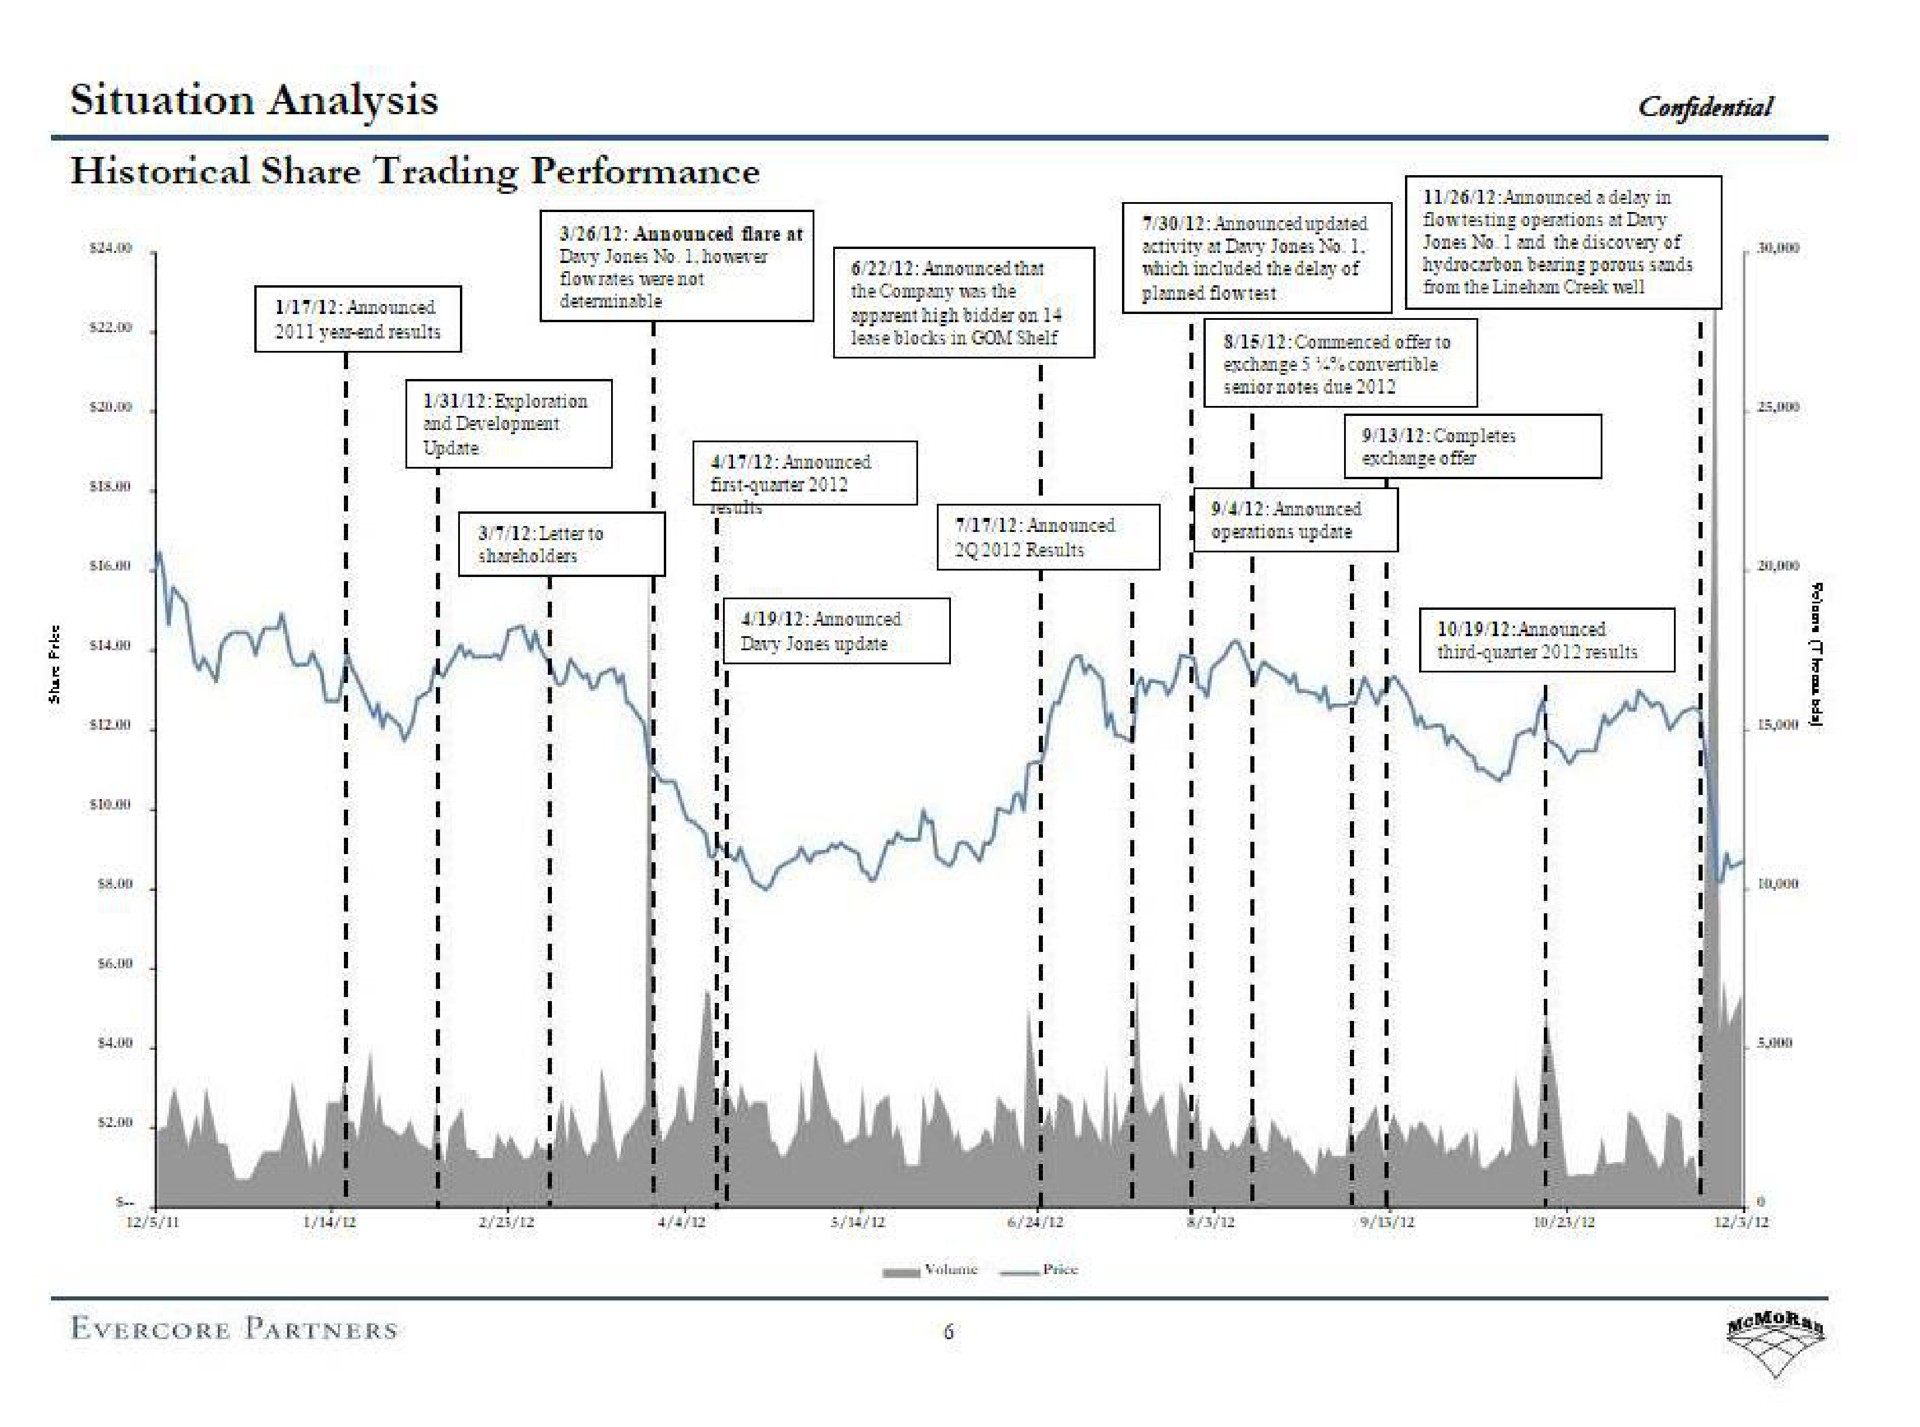 situation analysis historical share trading performance confidential | Evercore